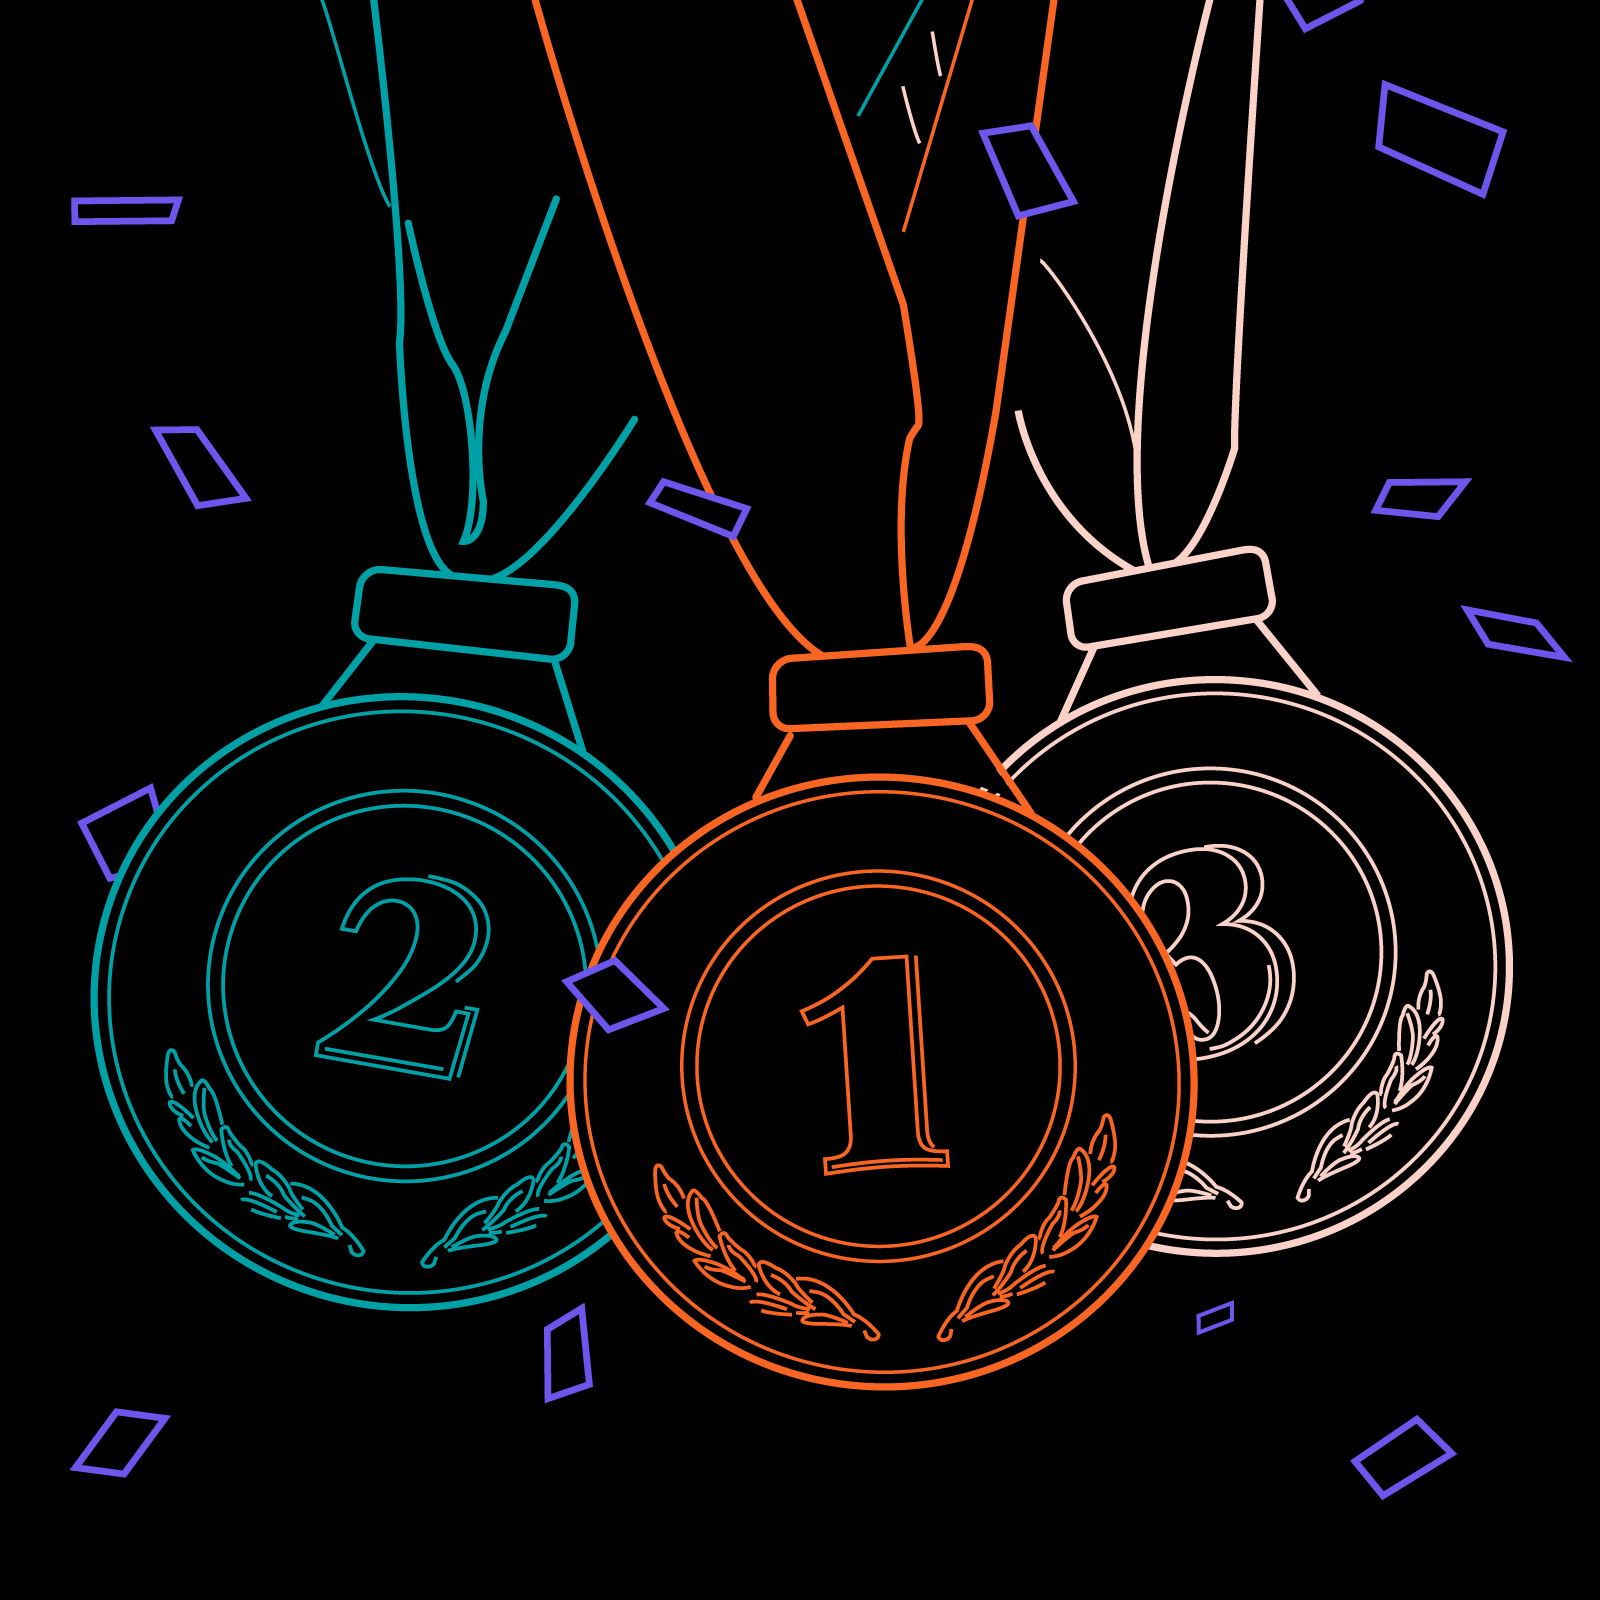 Illustrated medals